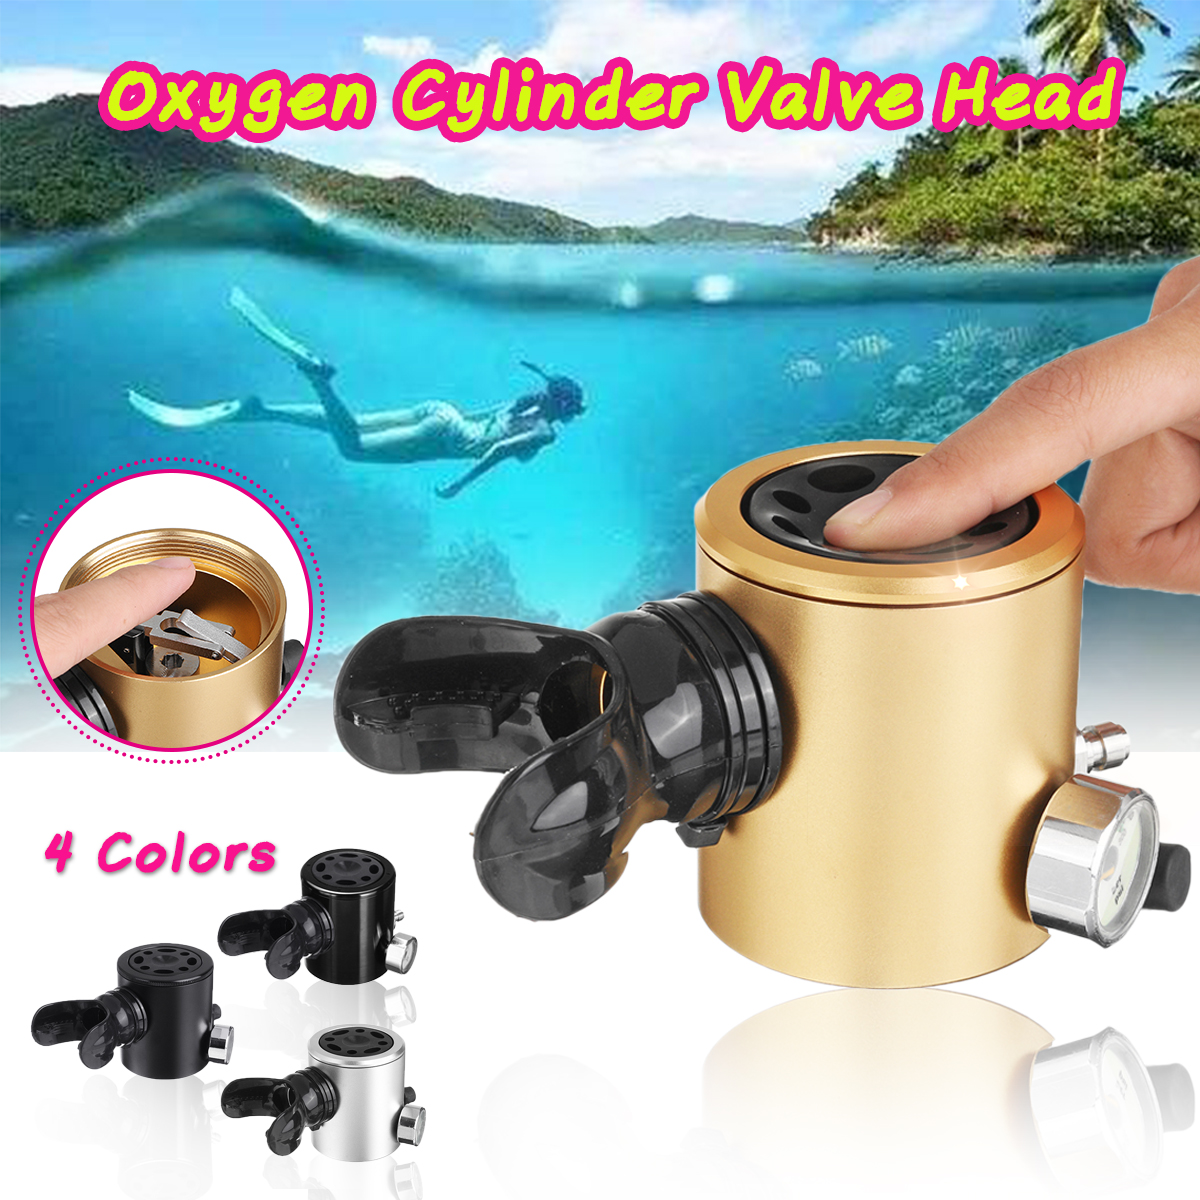 Scuba-Oxygen-Air-Tank-Diving-Equipment-Breathing-Underwater-Breathing-Refill-Adapter-Valve-Head-Mout-1561062-1